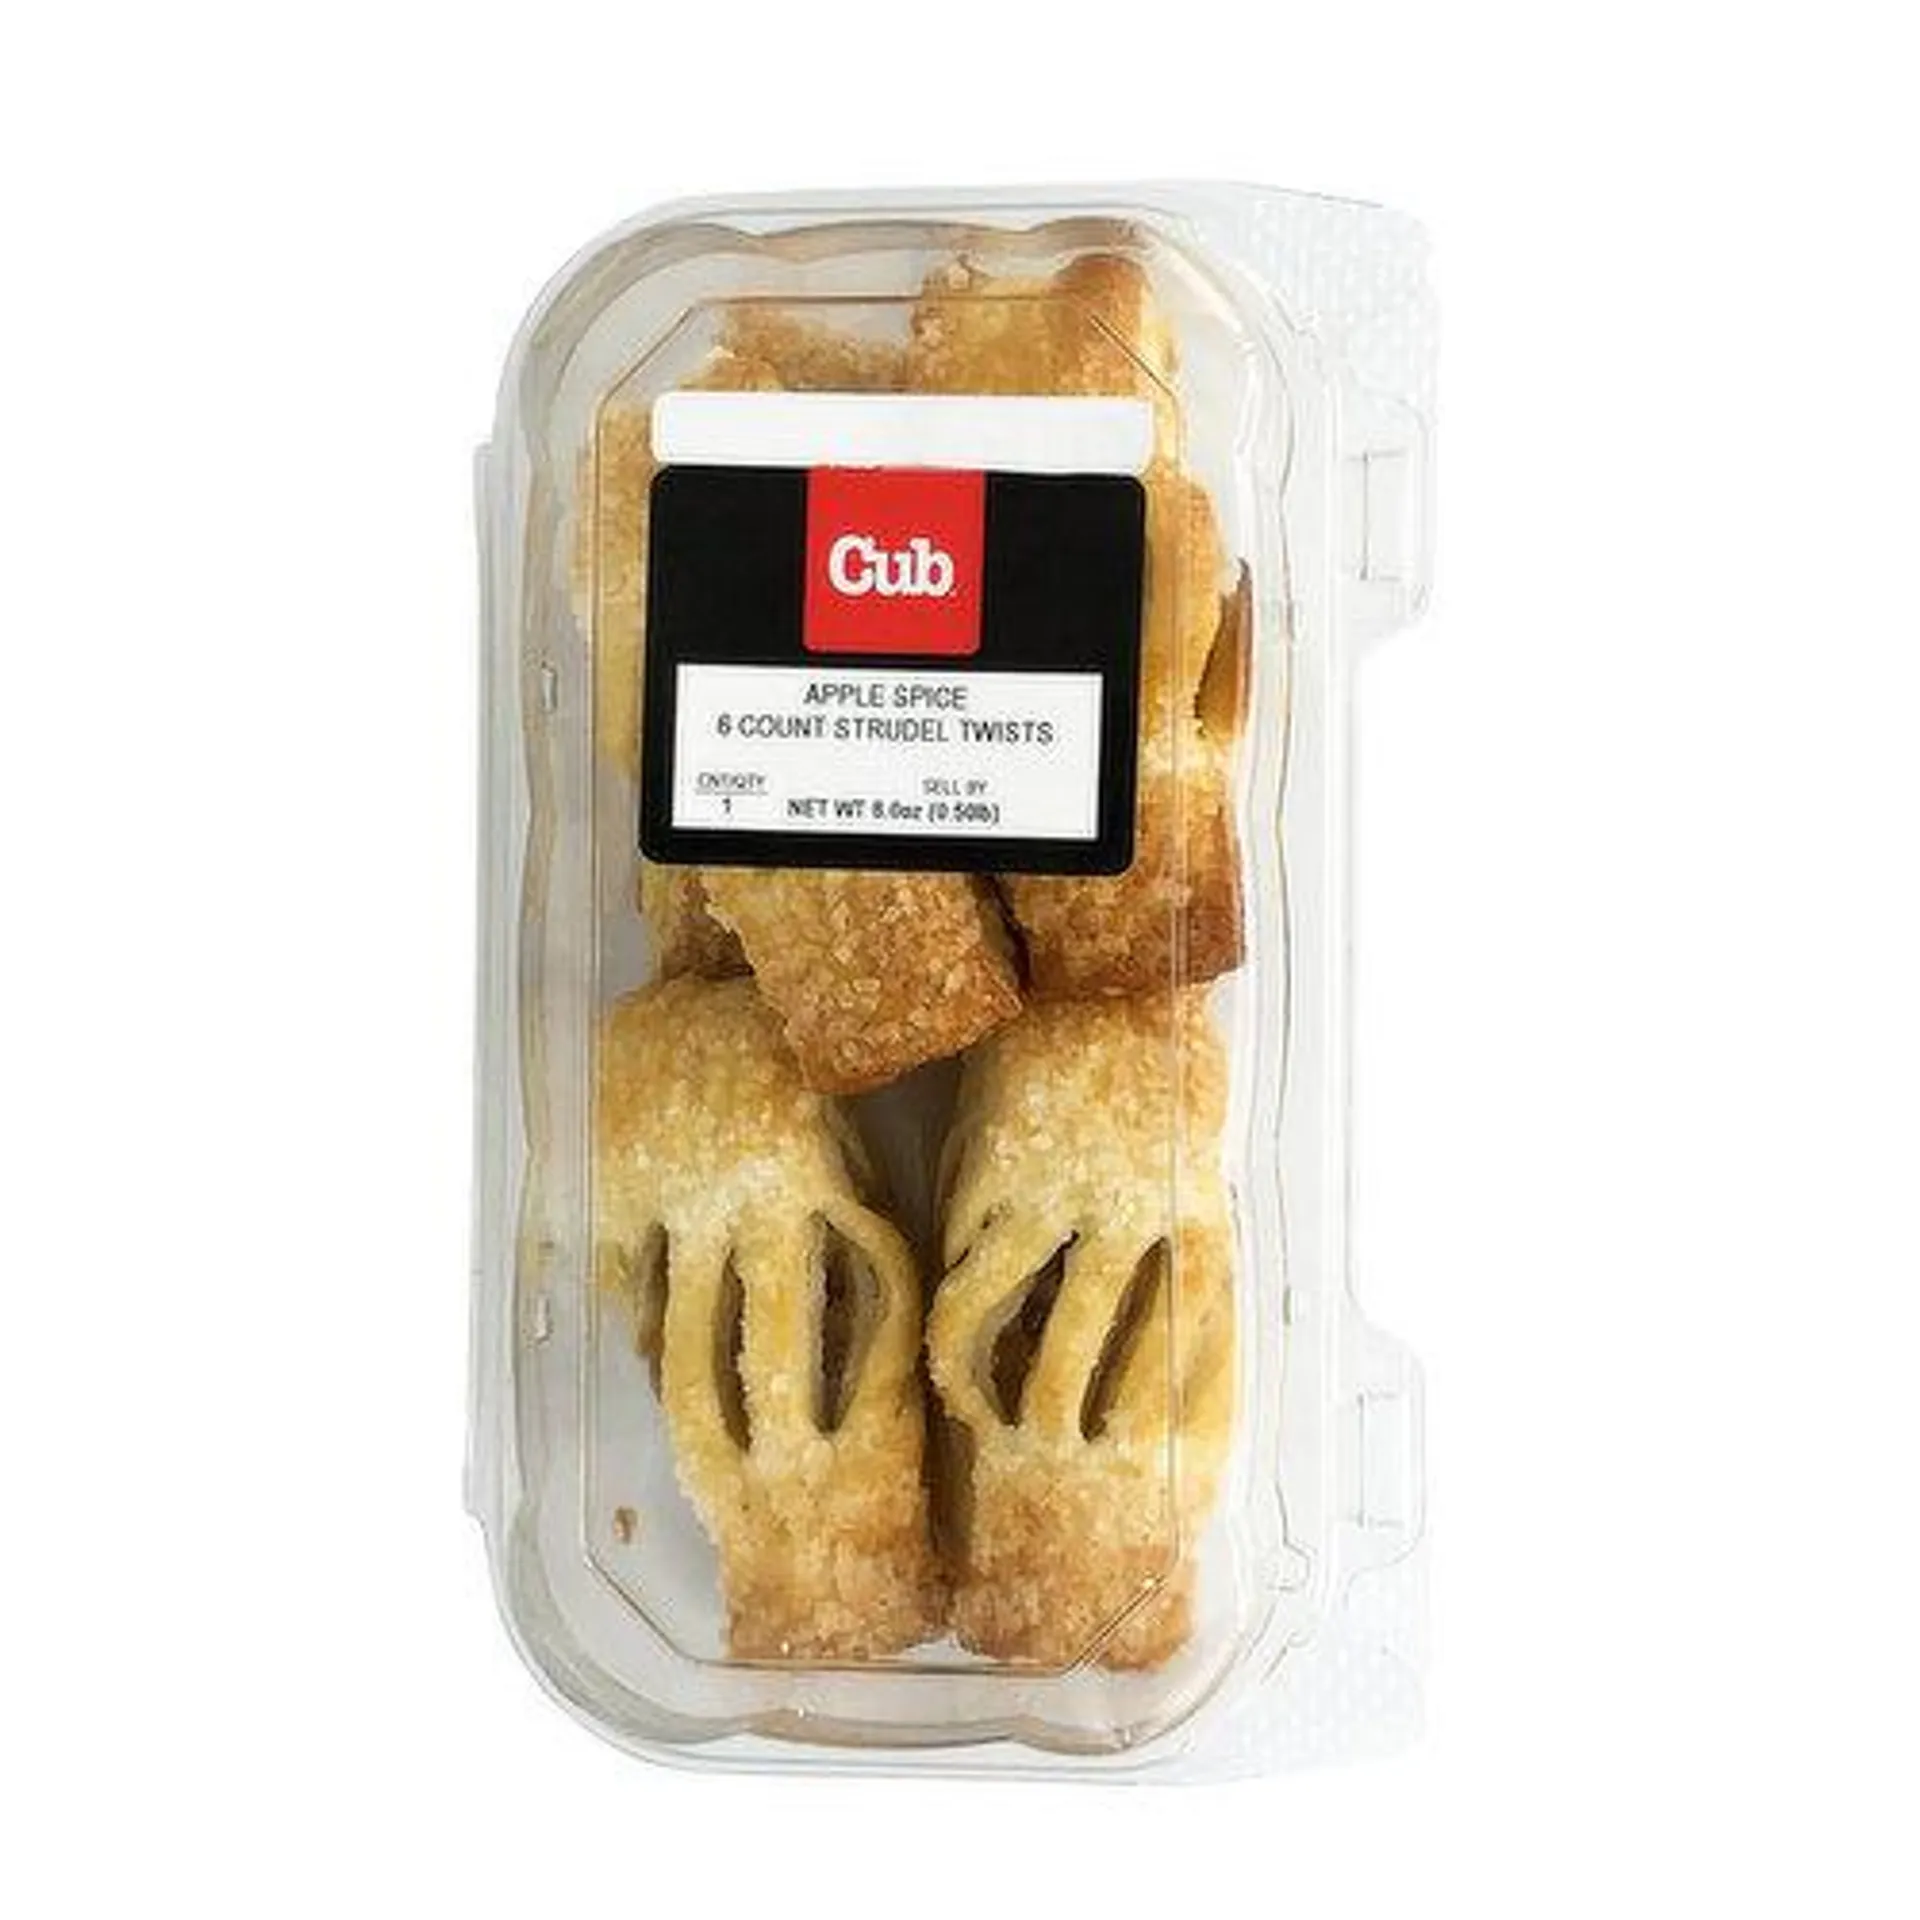 Cub Bakery Apple Spice Strudel Twists, 6 Count, 1 Each